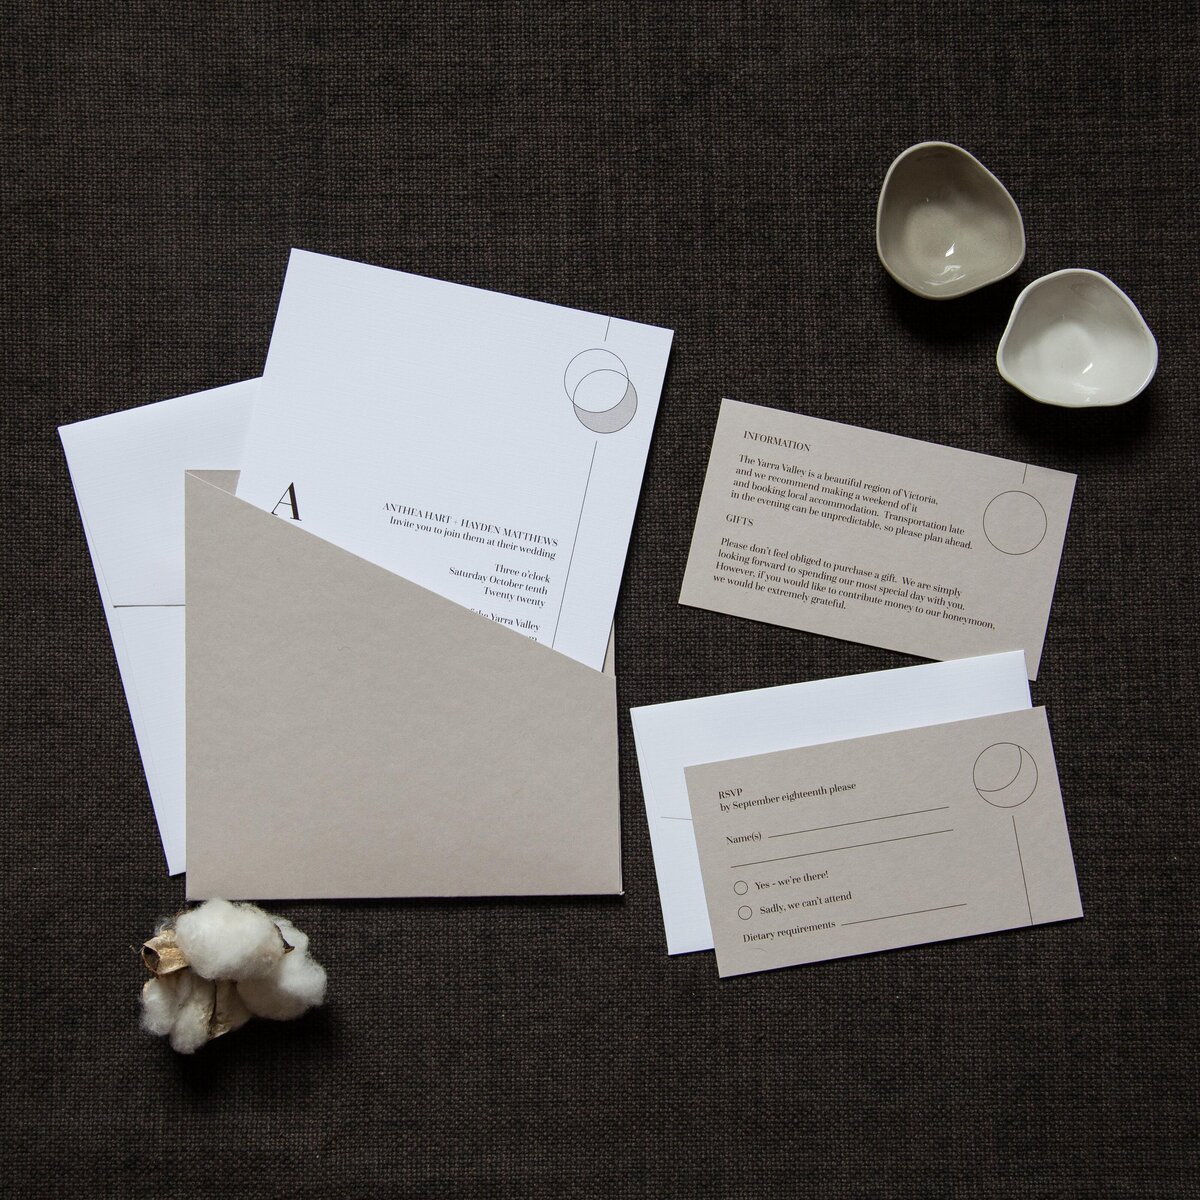 Pocket wedding invitation with white and stone cards